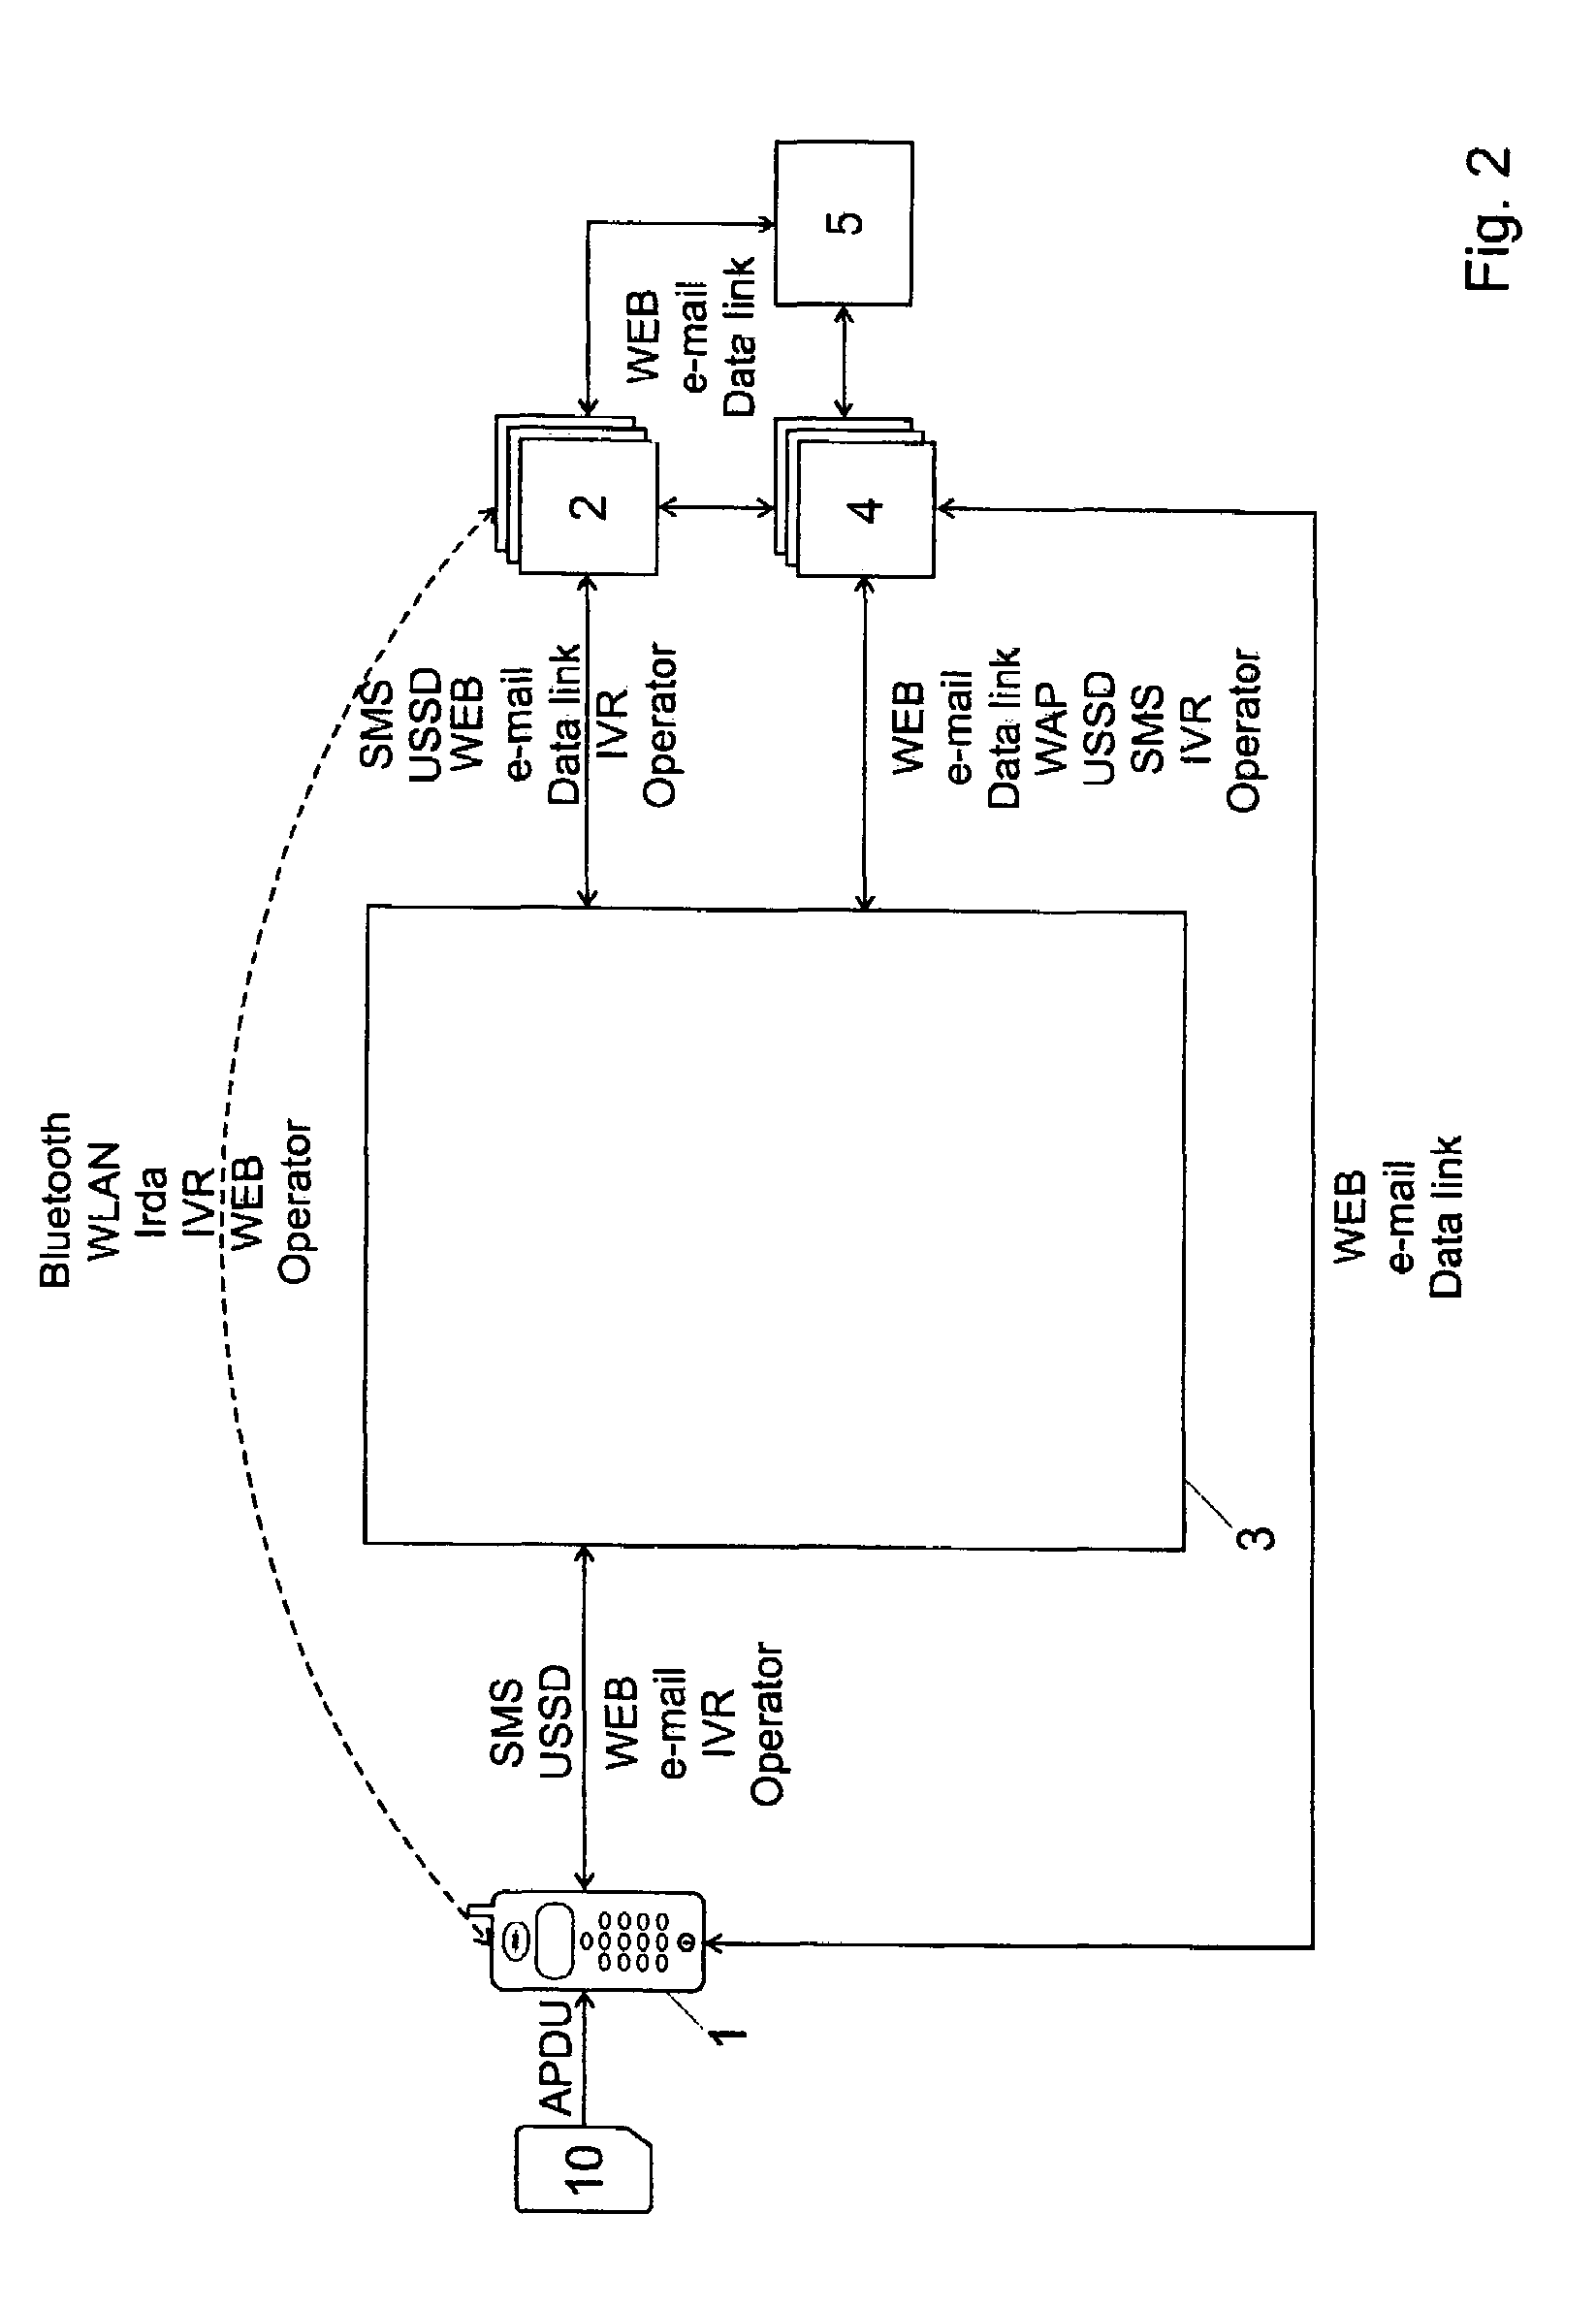 Method and system for detecting possible frauds in payment transactions